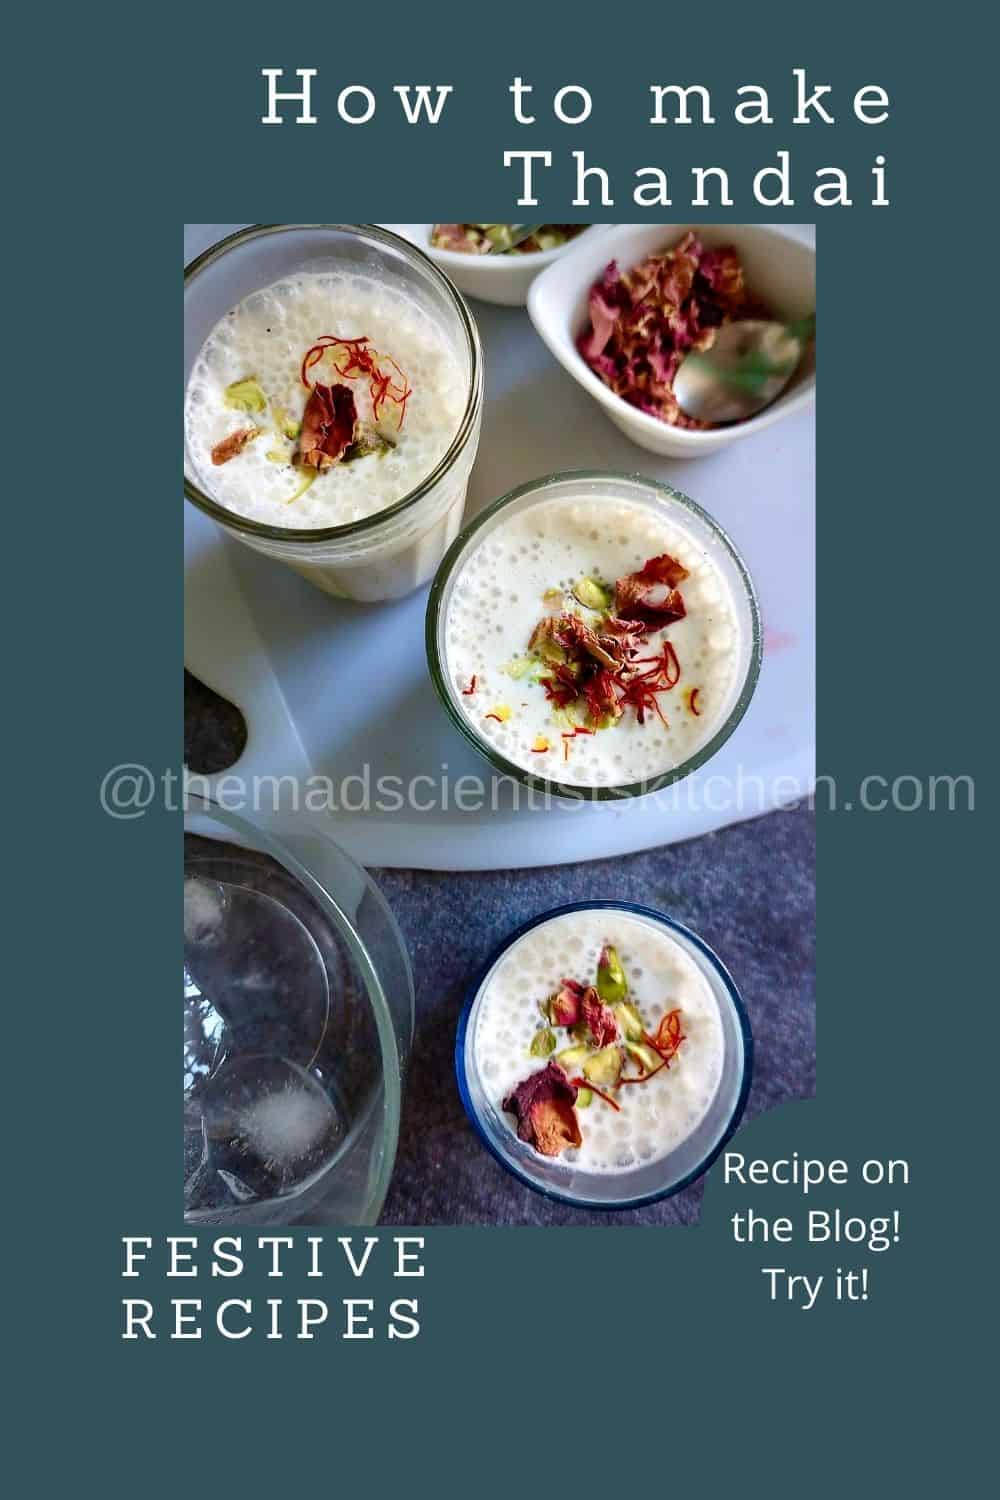 An easy way to cool down this sweltering summer, Thandai or Sardai make it!